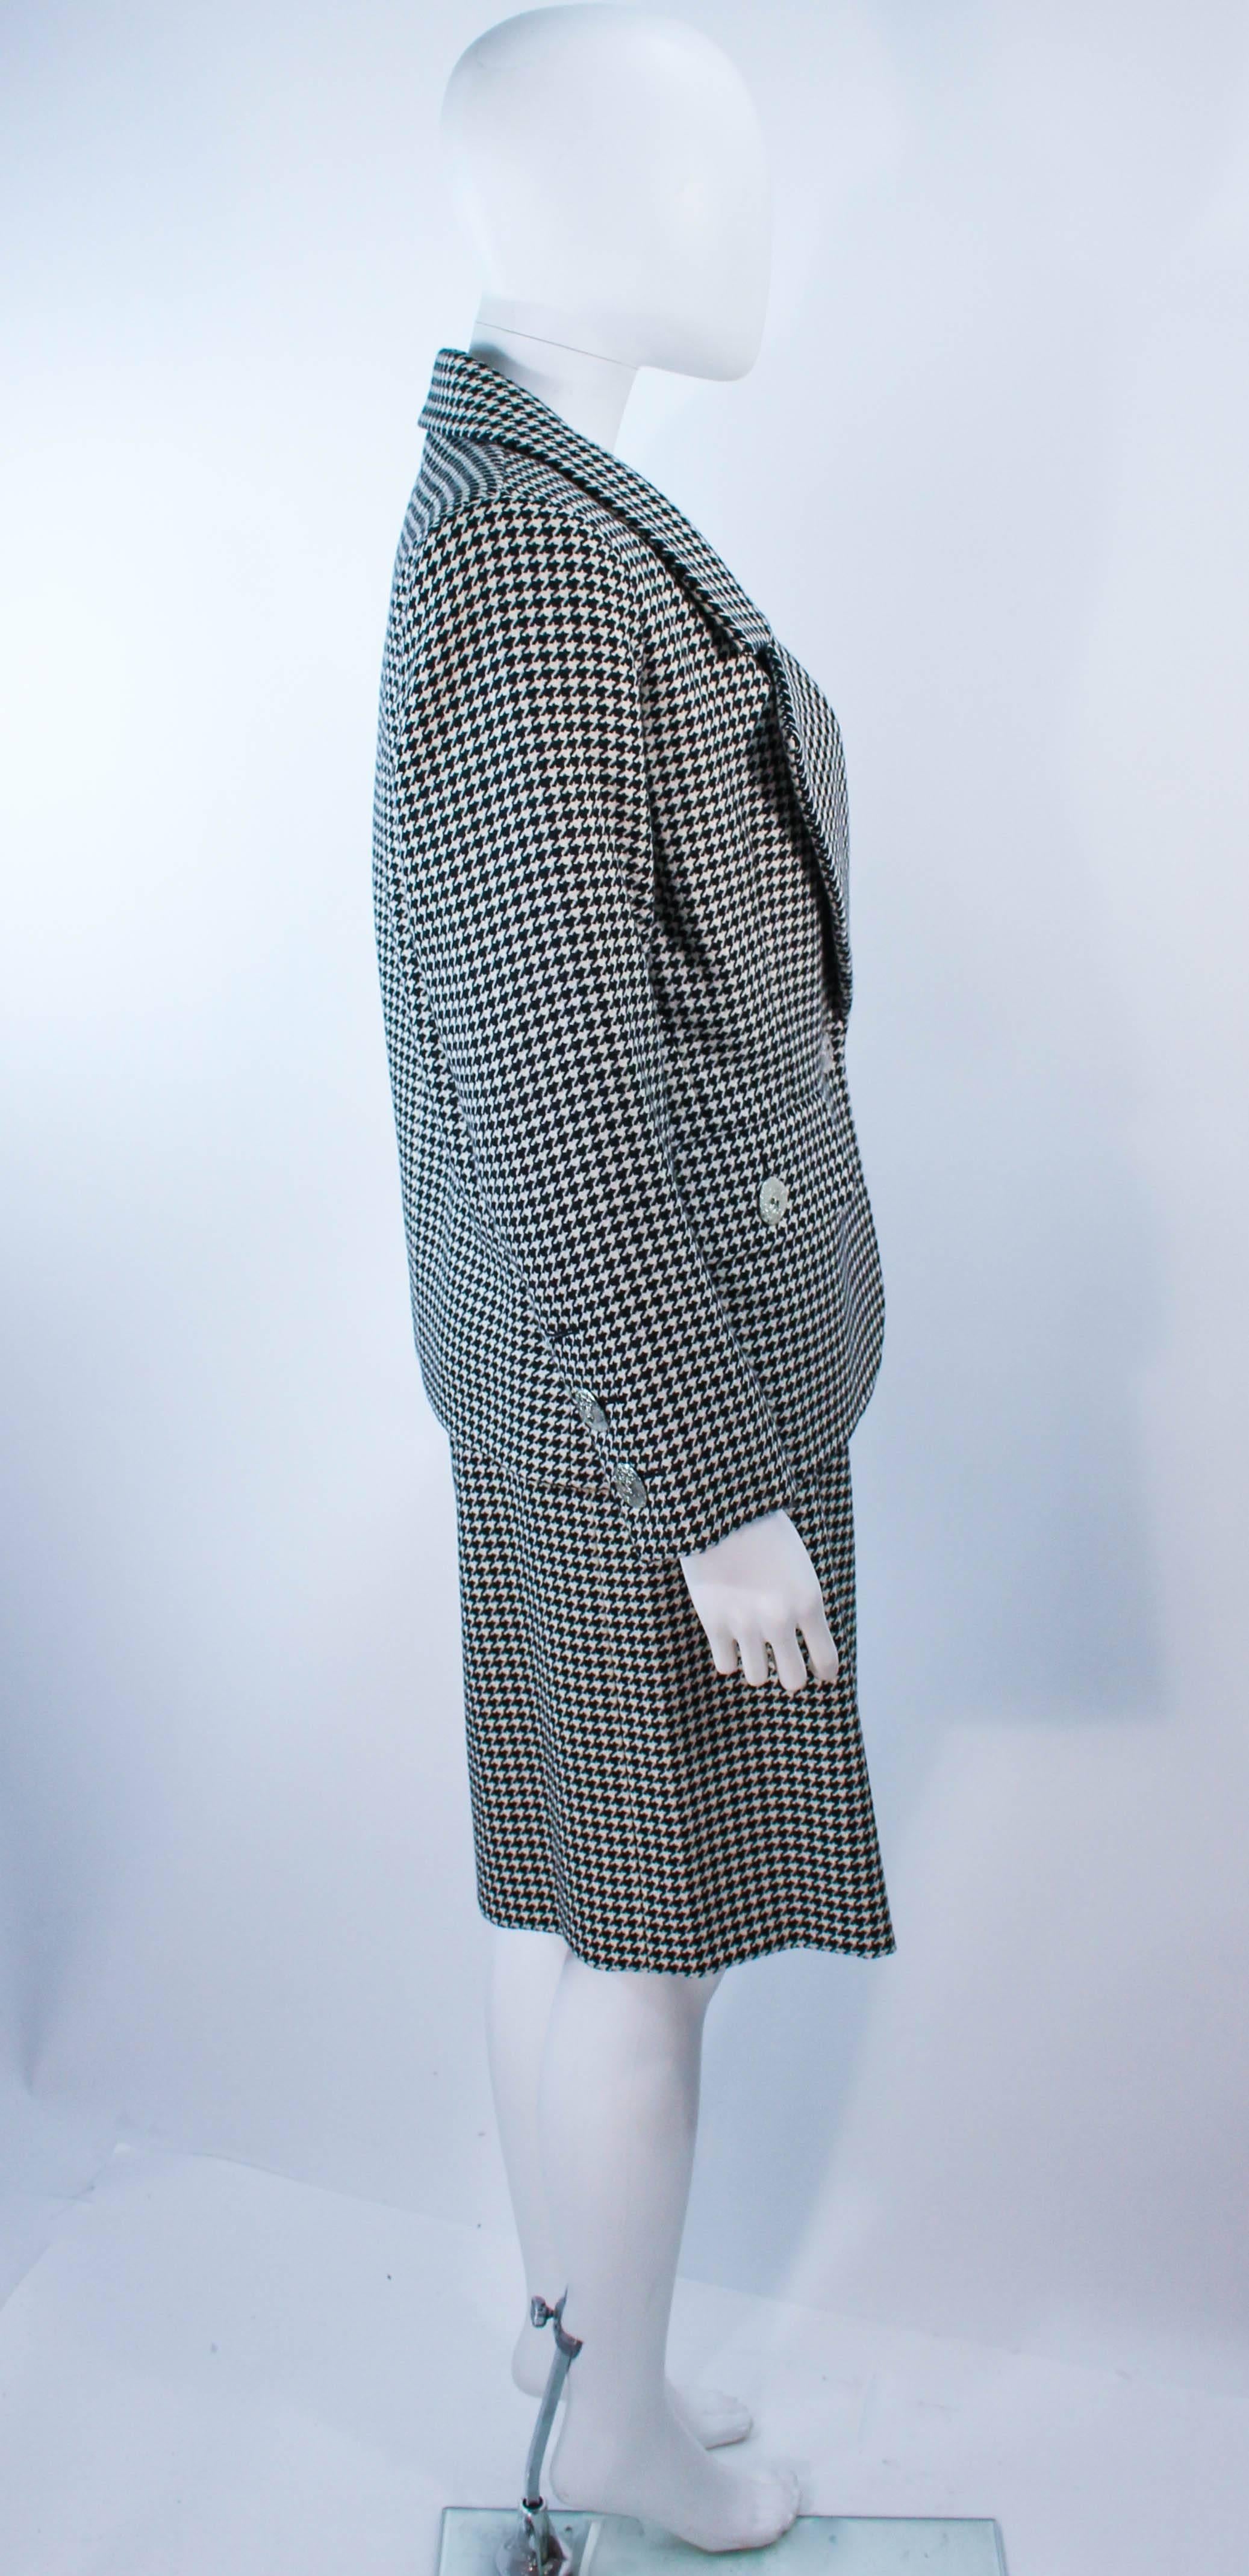 Women's YVES SAINT LAURENT Black and White Houndstooth Skirt Suit Size 8 10 For Sale